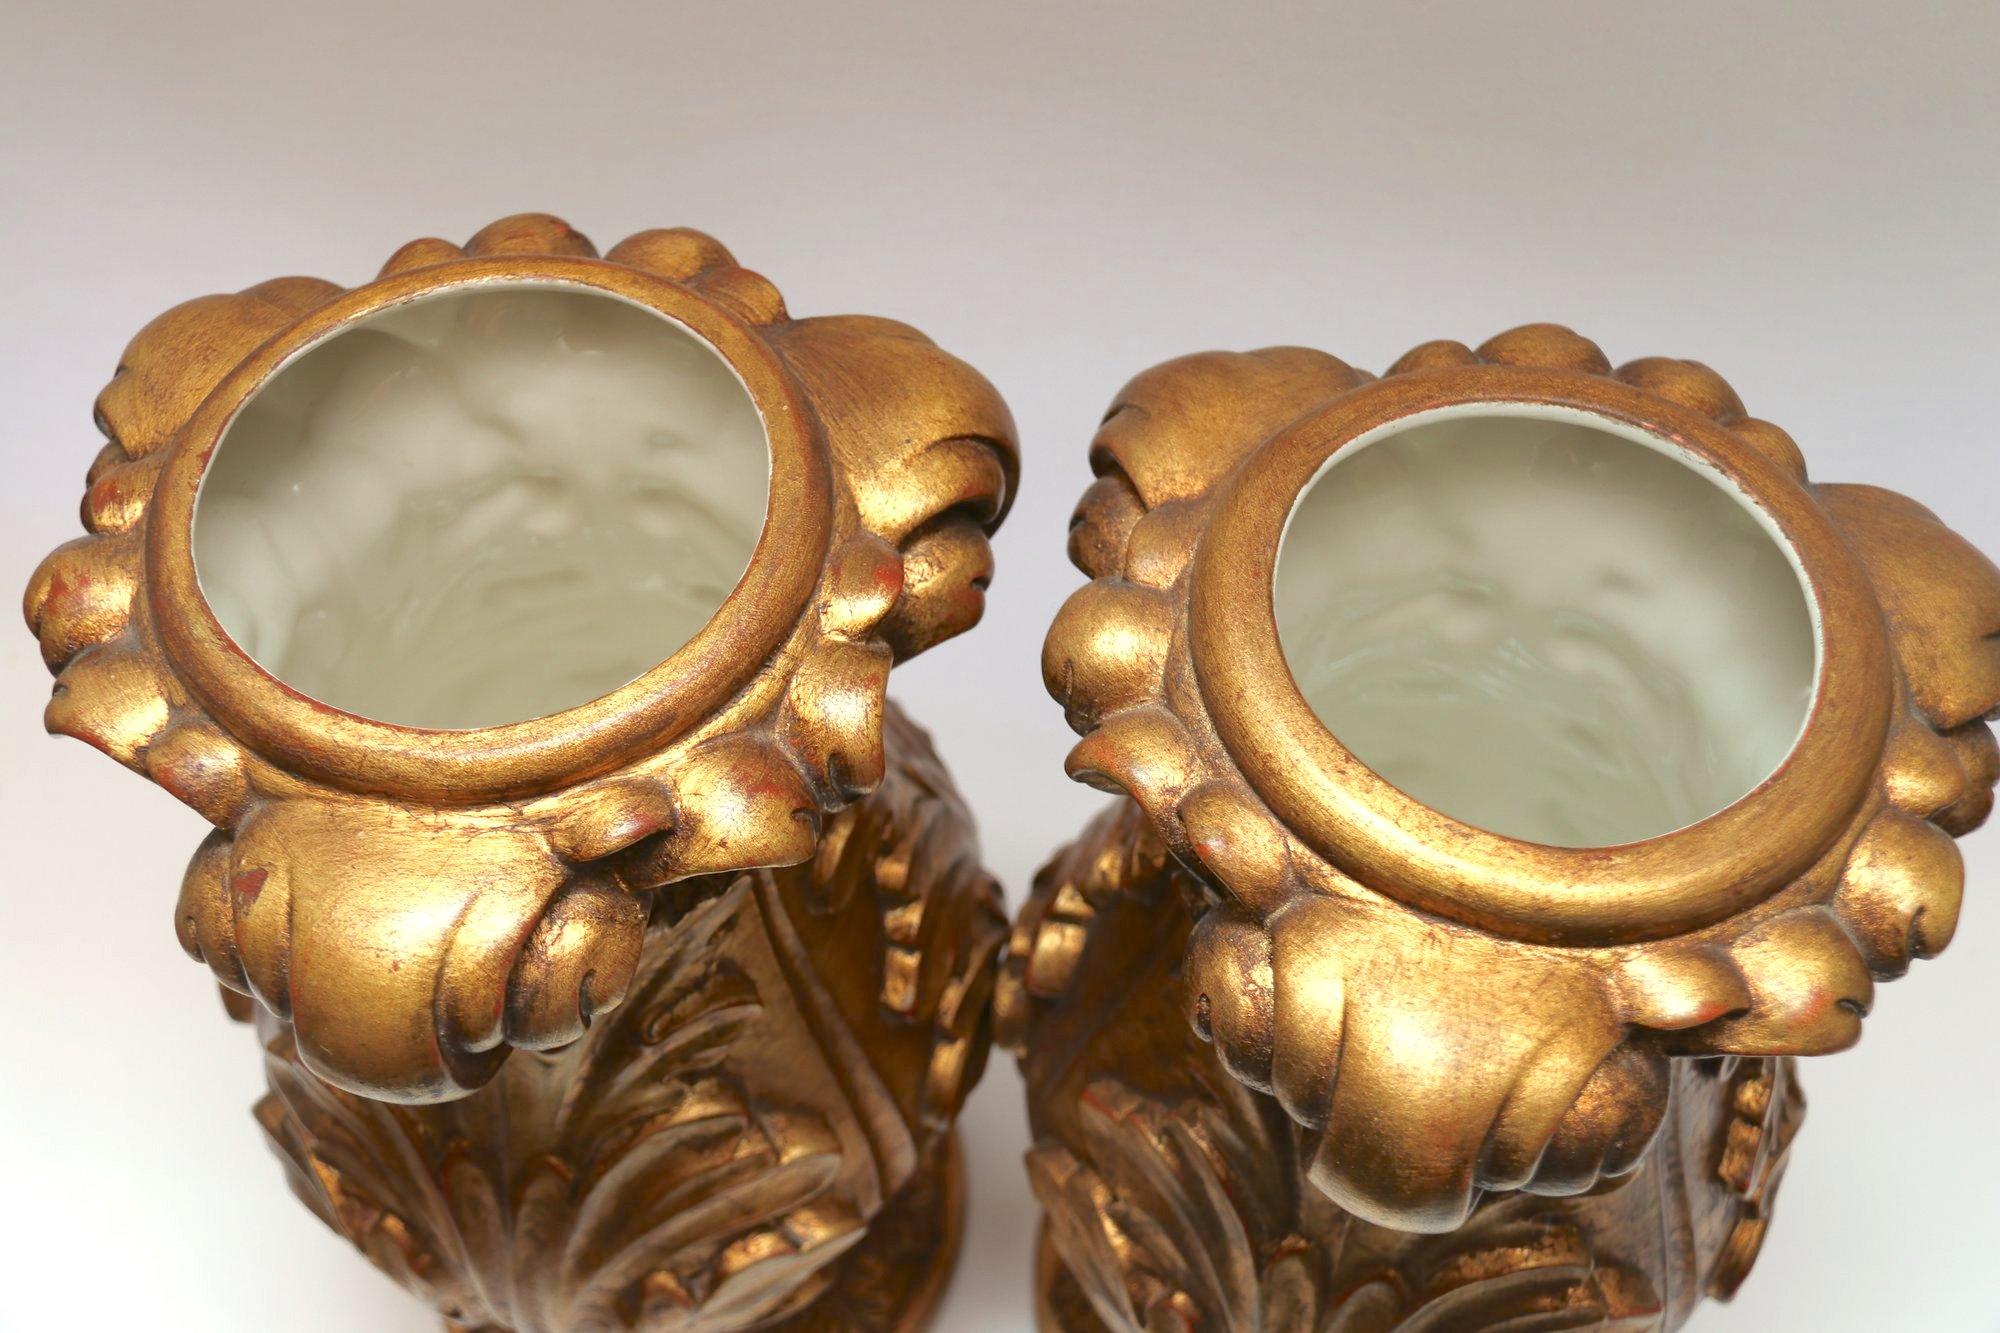 Pair Of Gold Painted Ceramic Urns. Made In Italy.